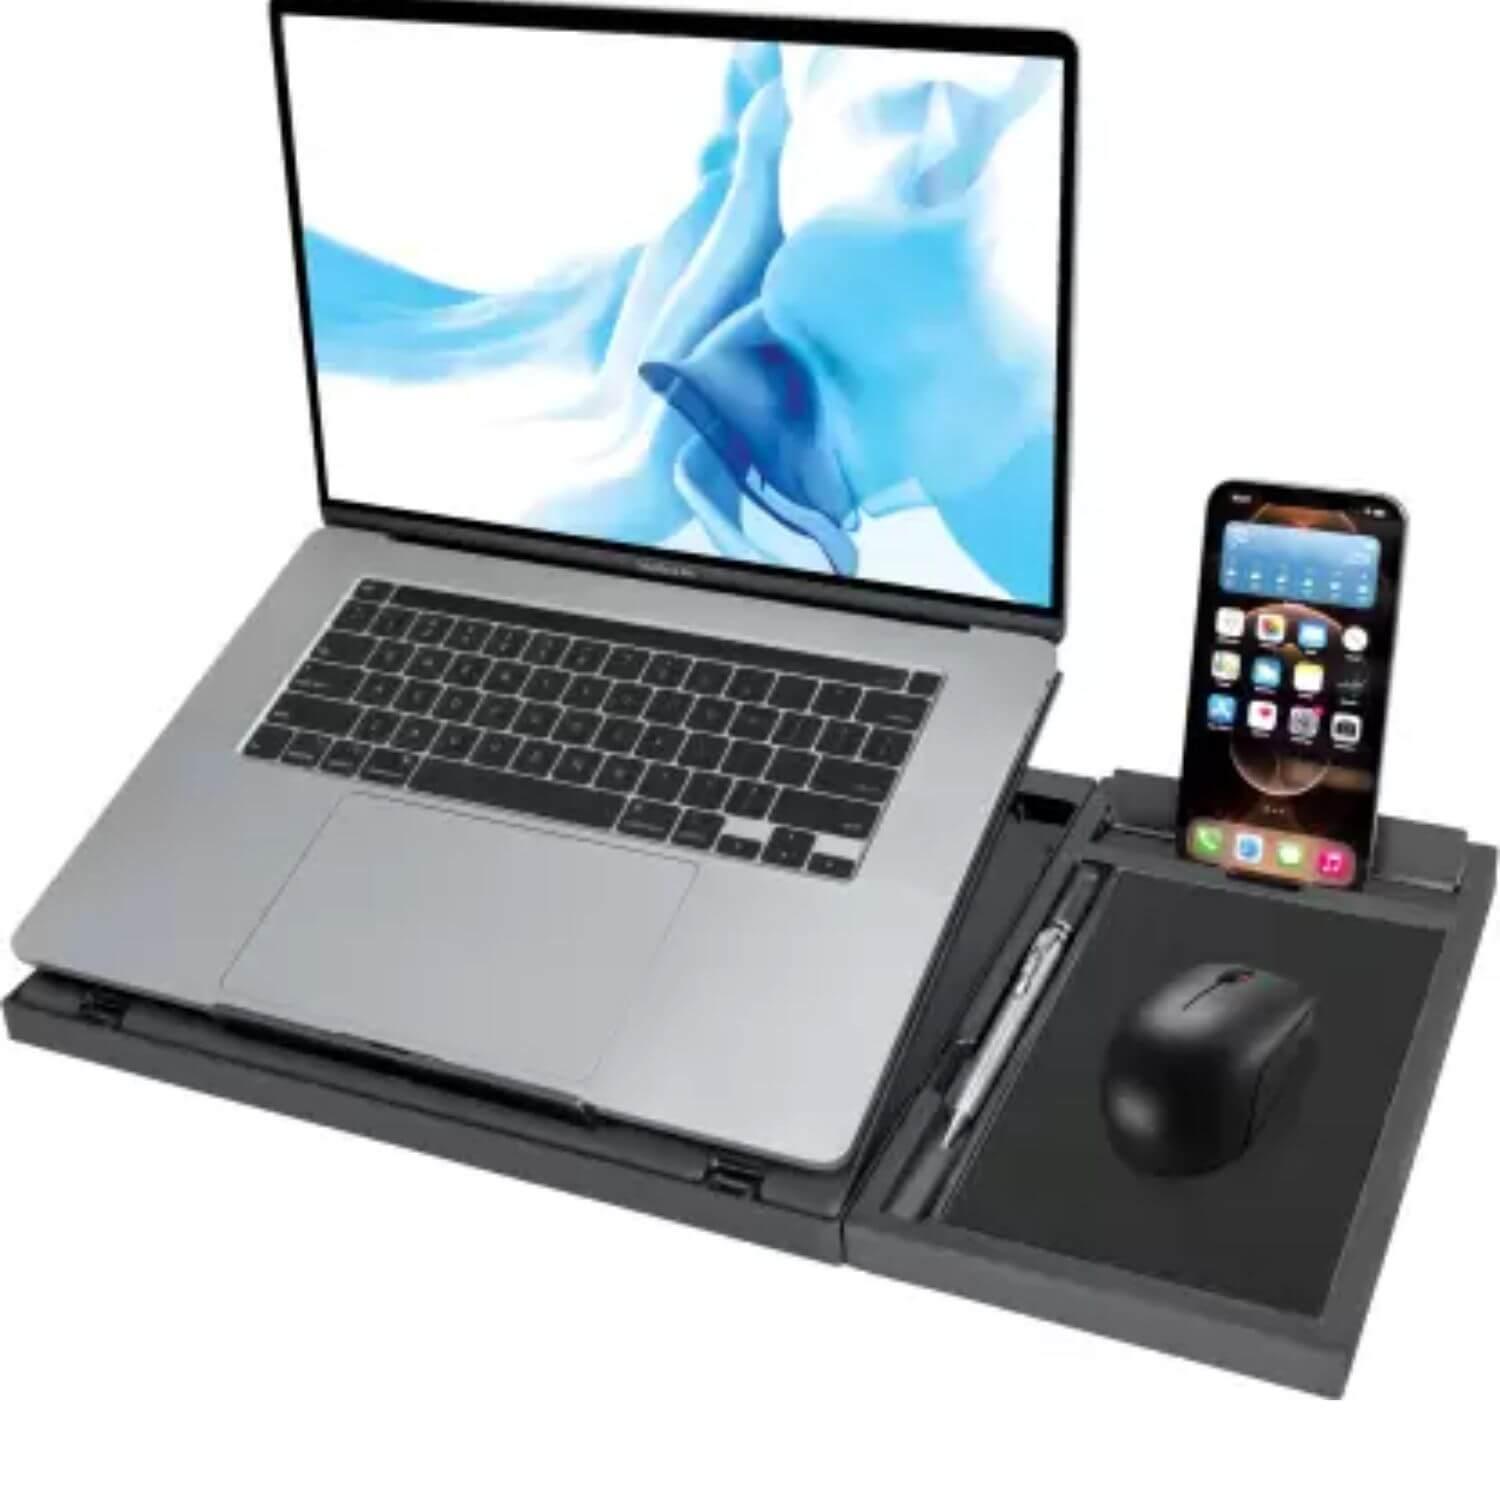 Adjustable Laptop Stand with Removable Mouse Mobile With Mouse Stand - GADGET WAGON Laptop Risers & Stands